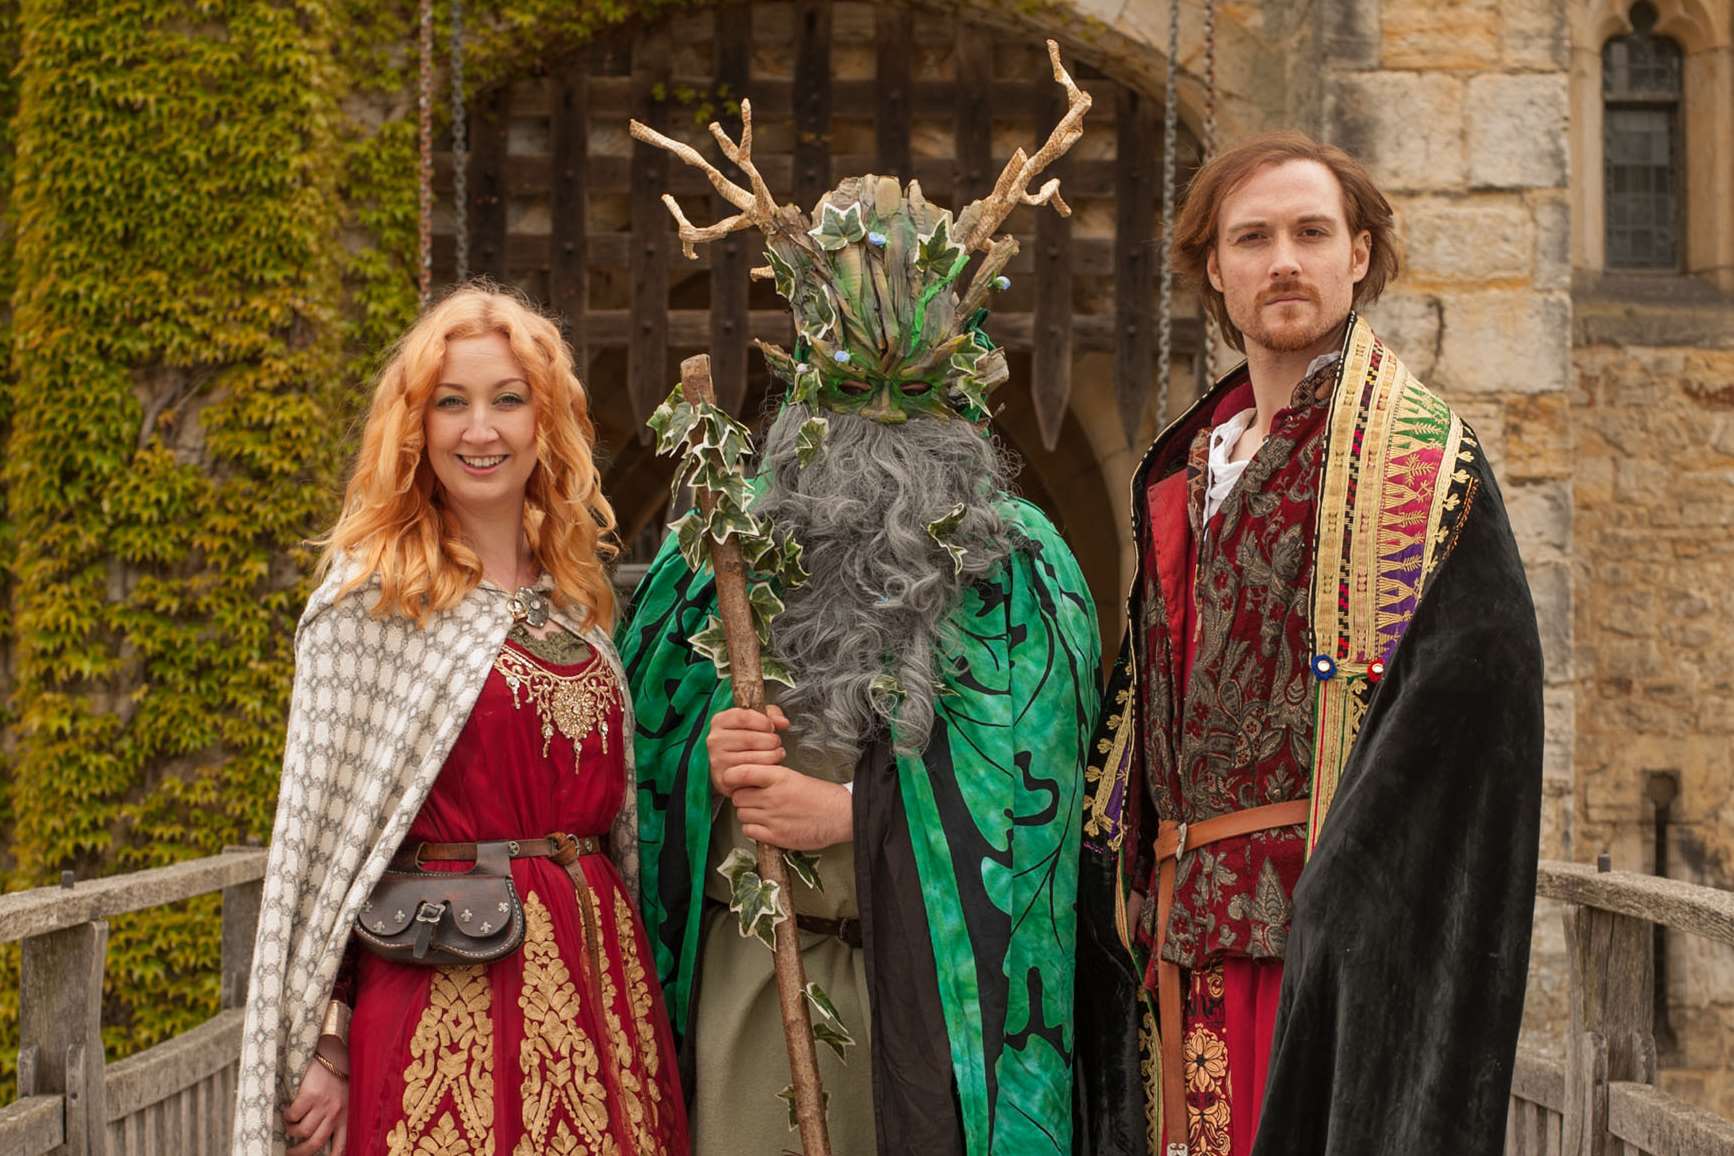 The Jack in the Green will visit Hever Castle as part of the May Day celebrations